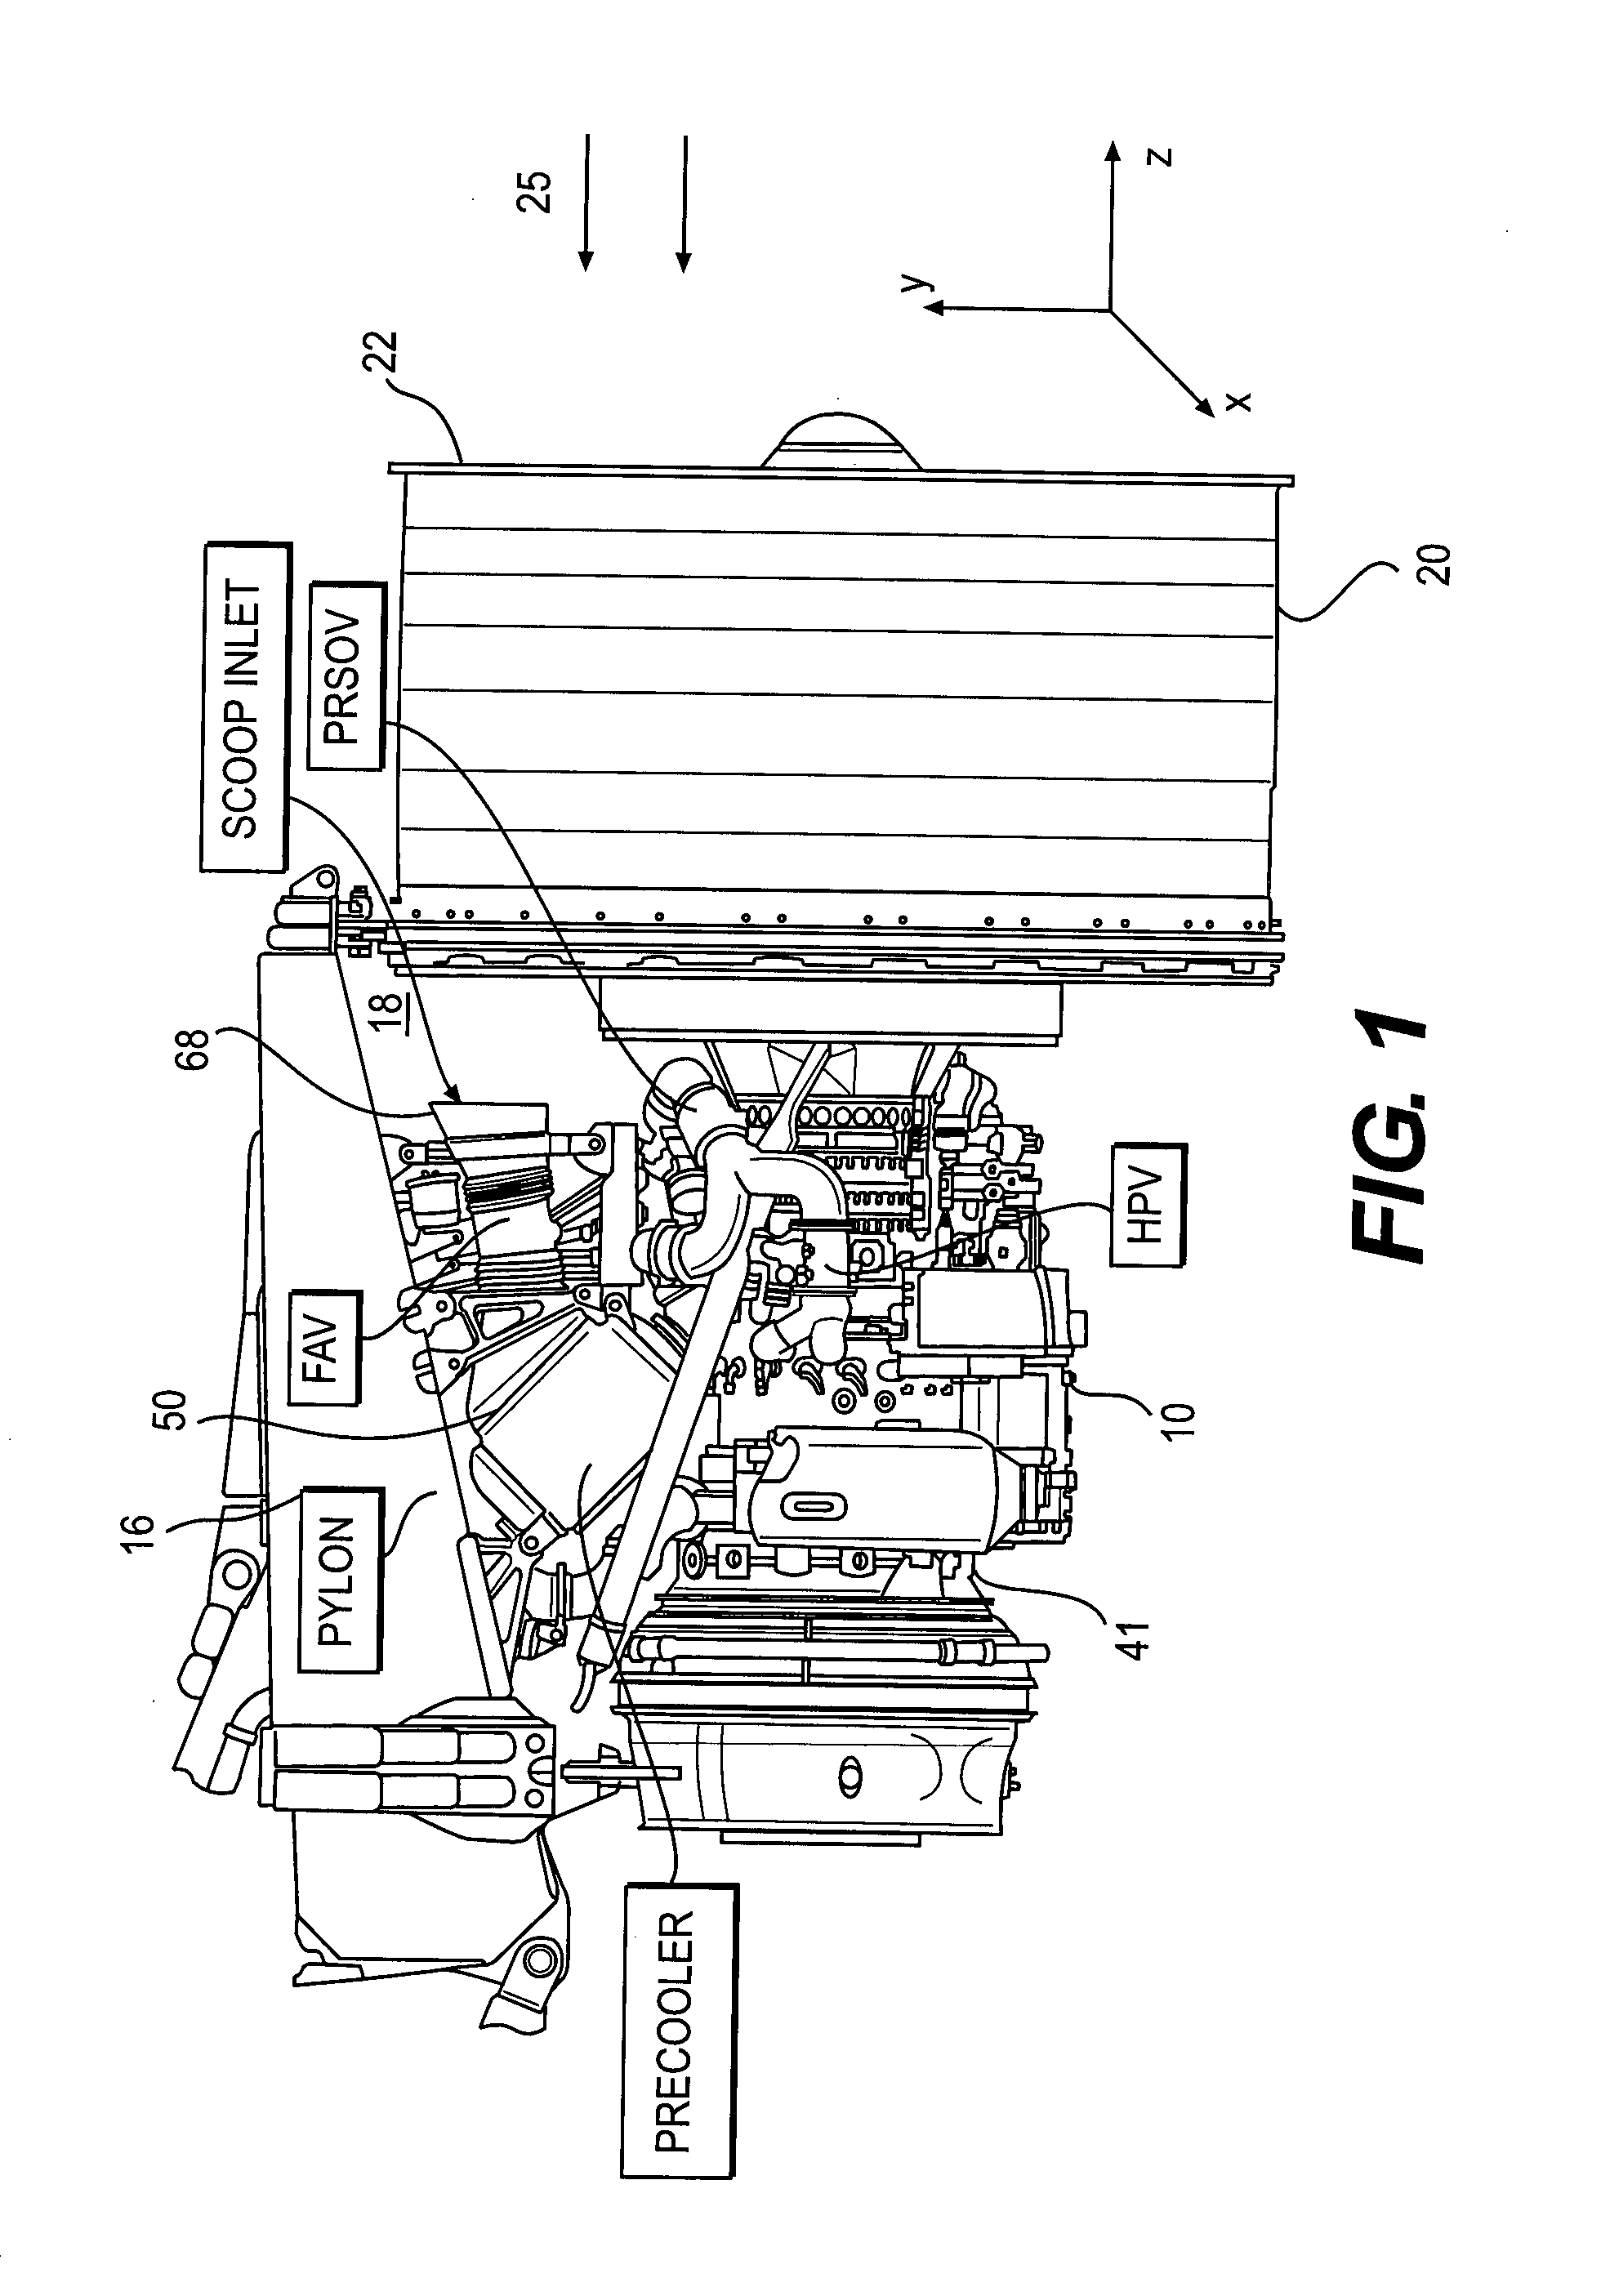 Apparatus for protecting aircraft components against foreign object damage